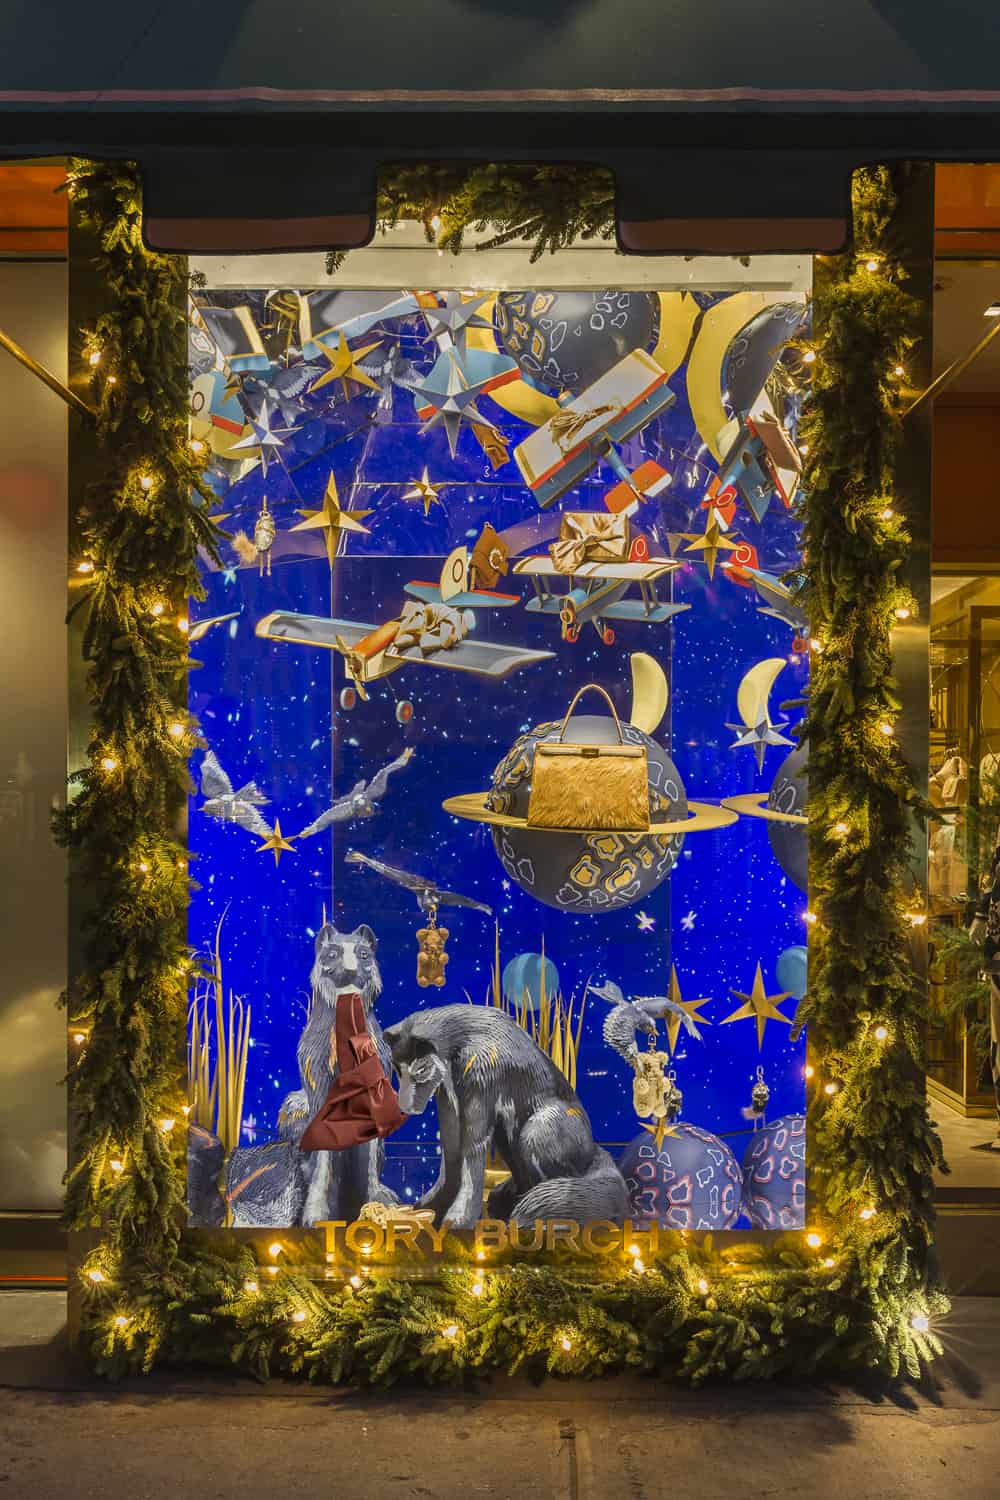 Inside the Making of Tory Burch's Holiday Windows